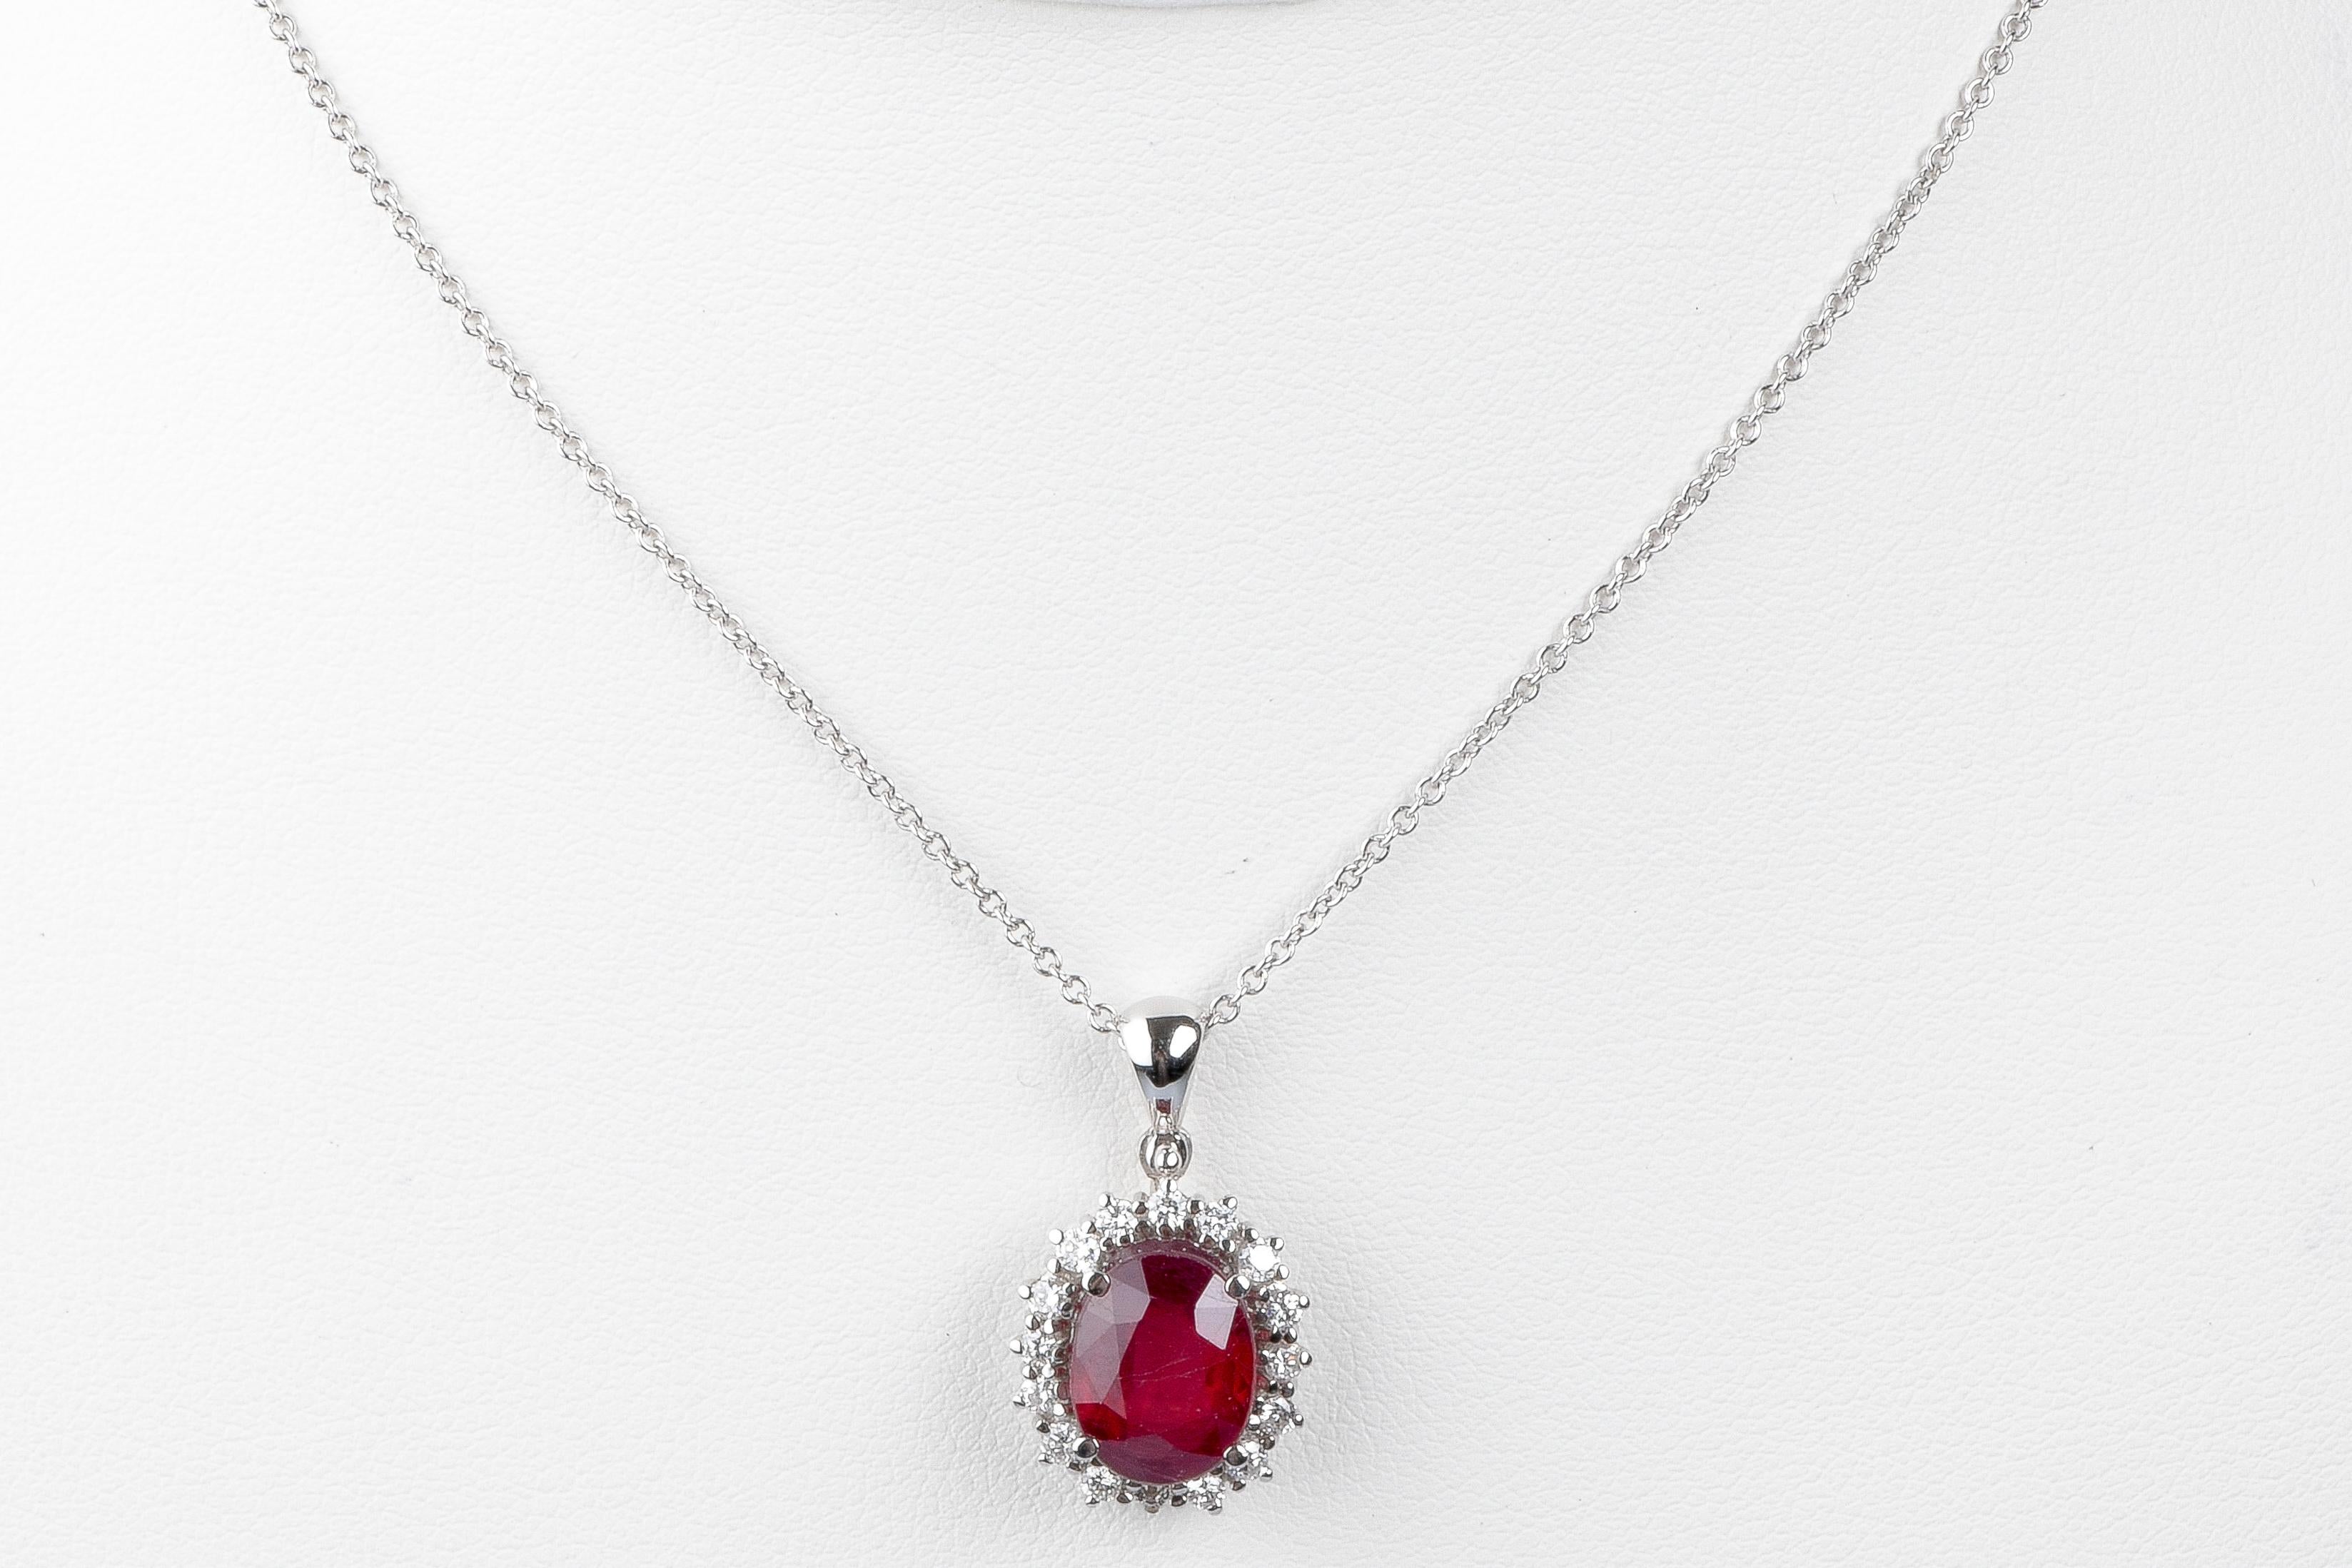 18 carat white gold necklace designed with 1 oval ruby weighing 3.31 carat and 16 round brillant cut diamonds weighing 0.40 carat in total.

Qualité du diamant
Couleur : F - G
Clarté : VS - SI
Weight:  5.54 gr. 

Dimensions : 45 x 0.10 cm
Dimensions